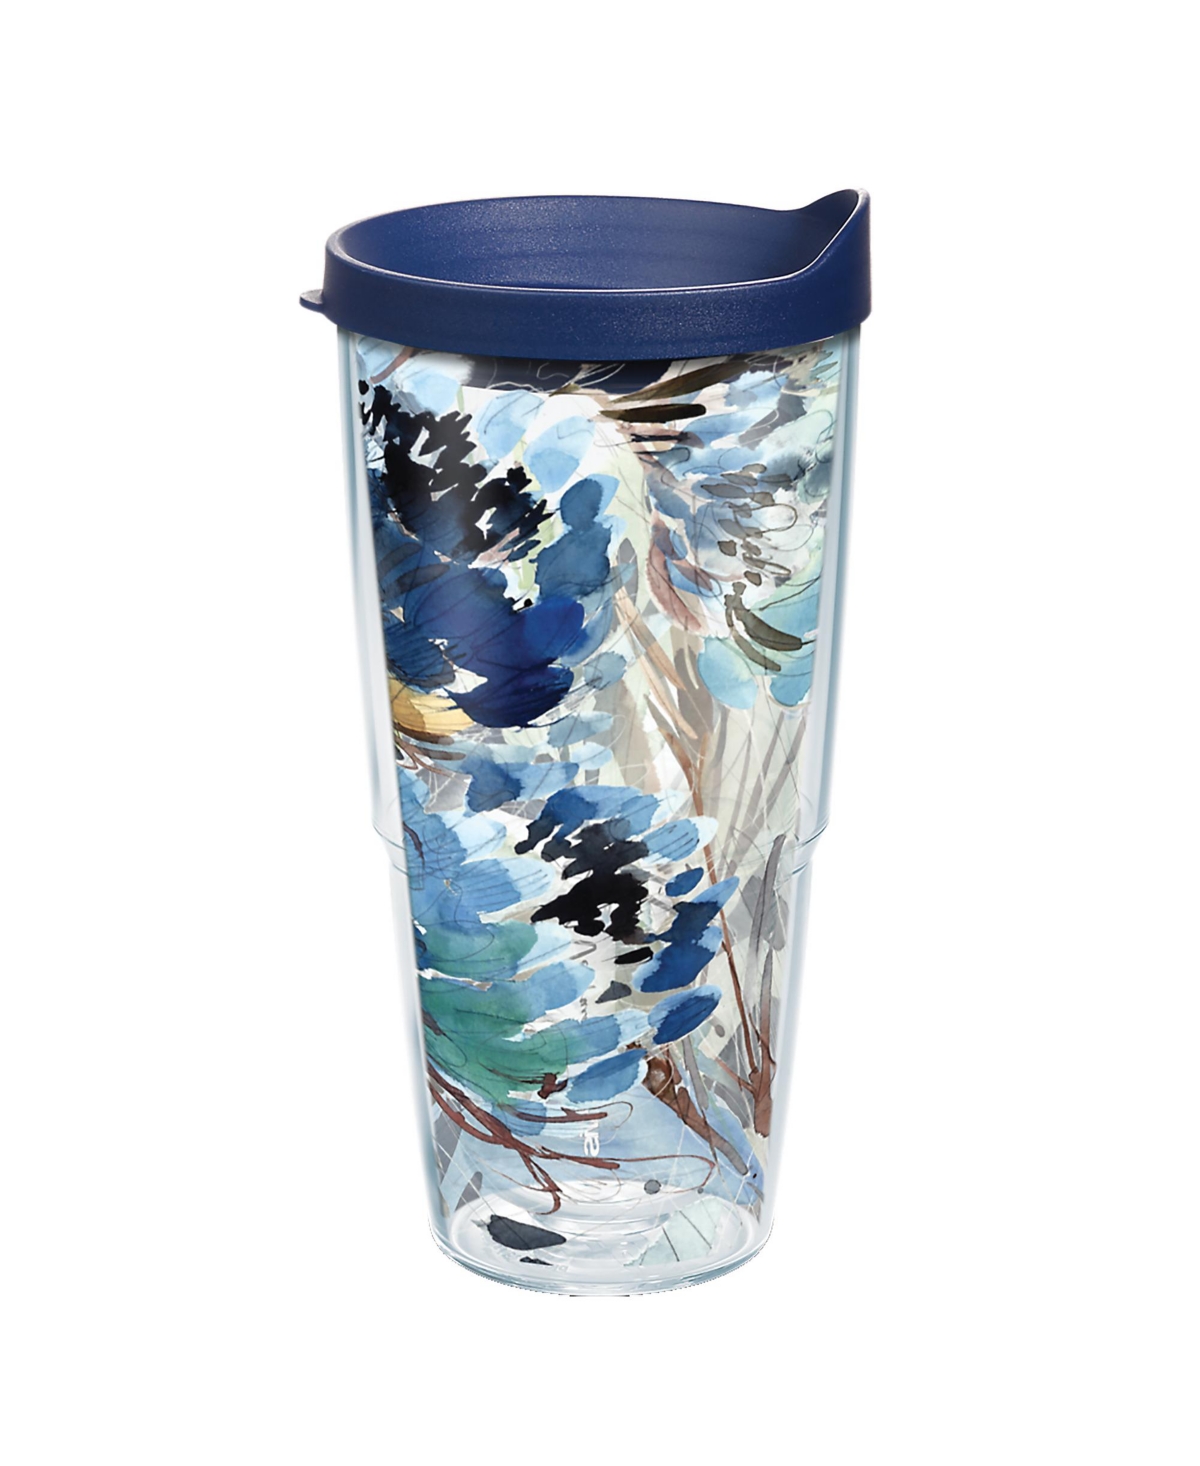 Tervis Tumbler Tervis Kelly Ventura Protea Made In Usa Double Walled Insulated Tumbler Travel Cup Keeps Drinks Cold In Open Miscellaneous